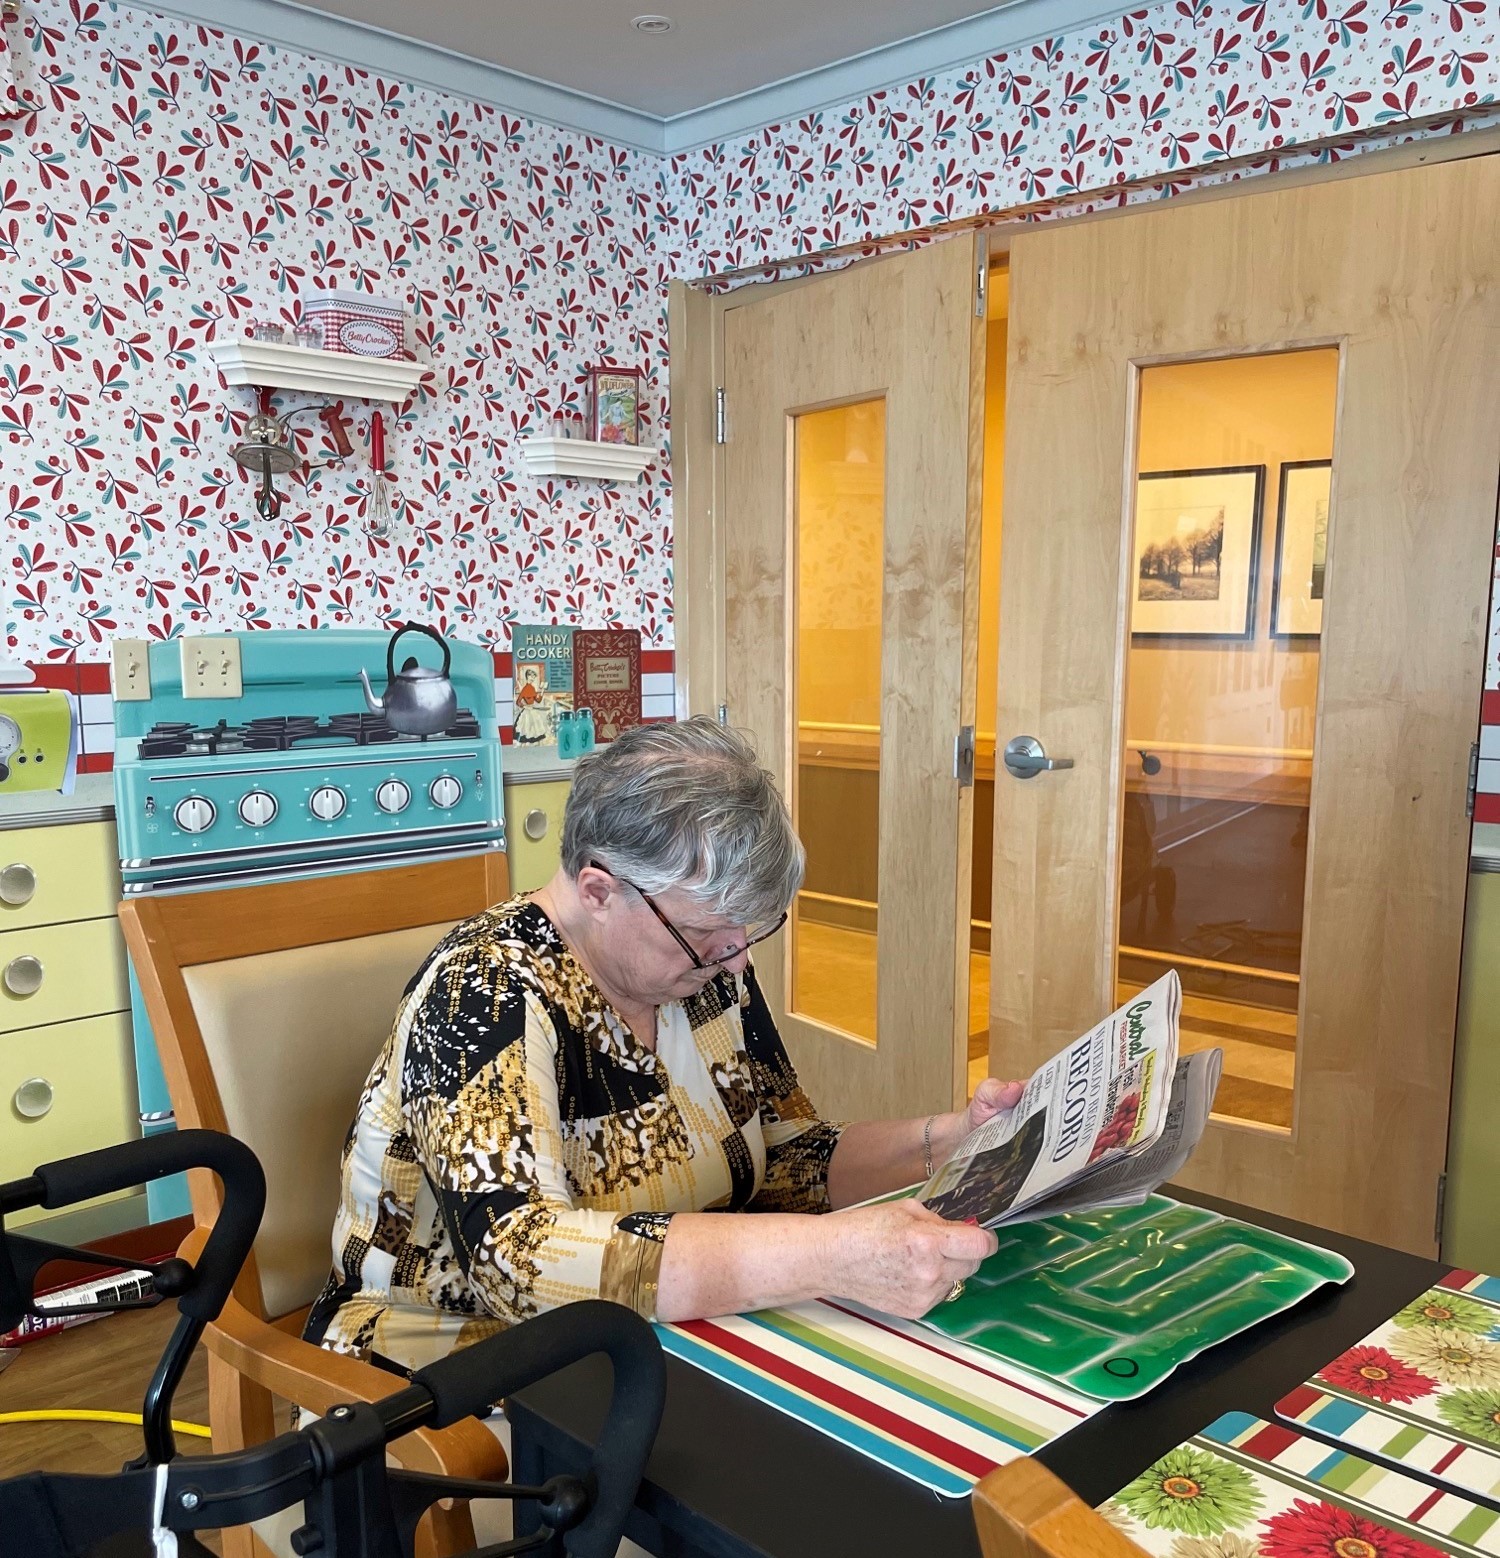 A resident reading a newspaper in front of a Sensory-scapes mural depicting a 1950s kitchen